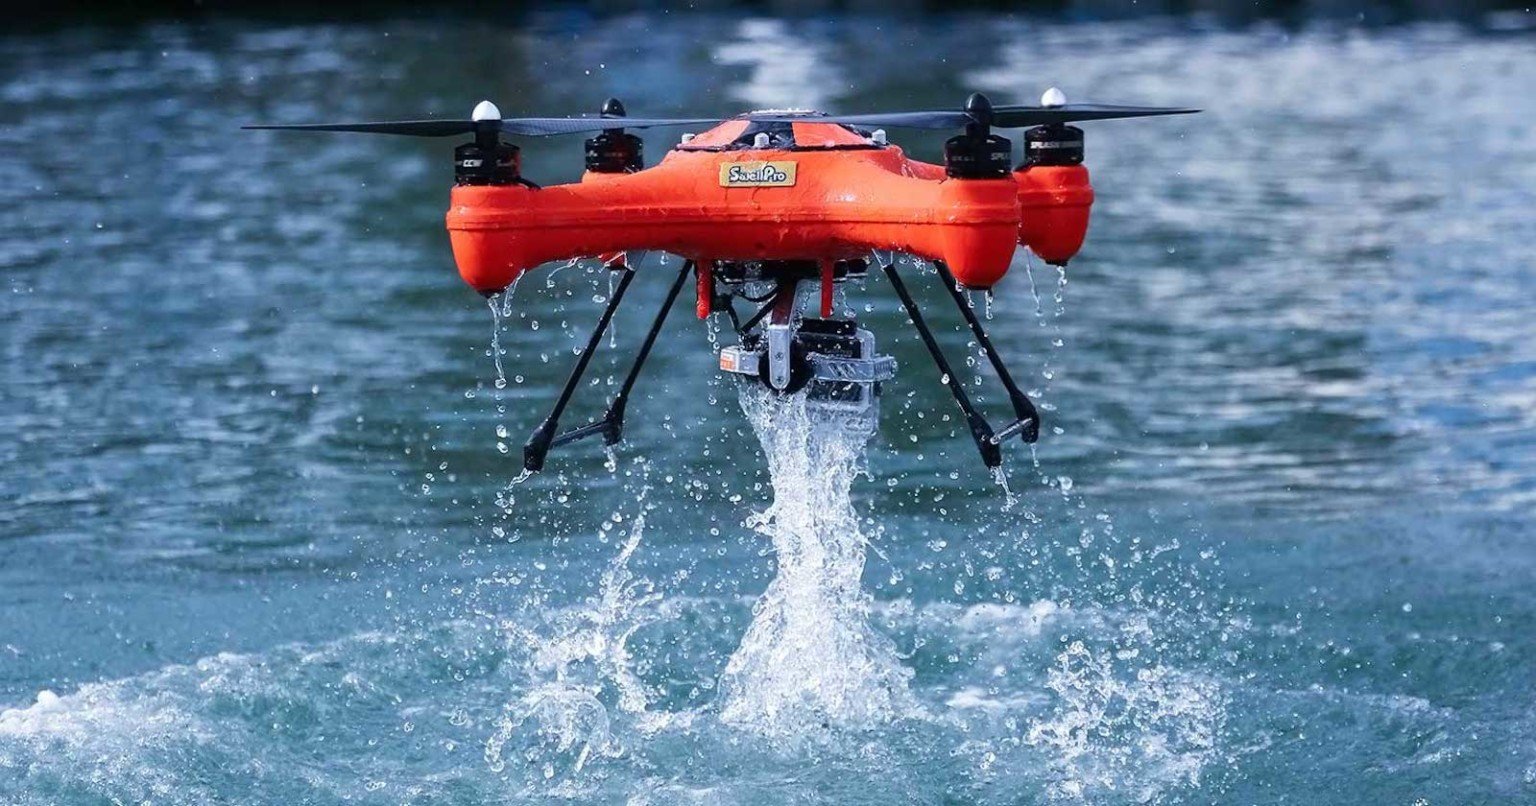 SwellPro's Waterproof Drones Don't Just Fly, They Float to Film ...